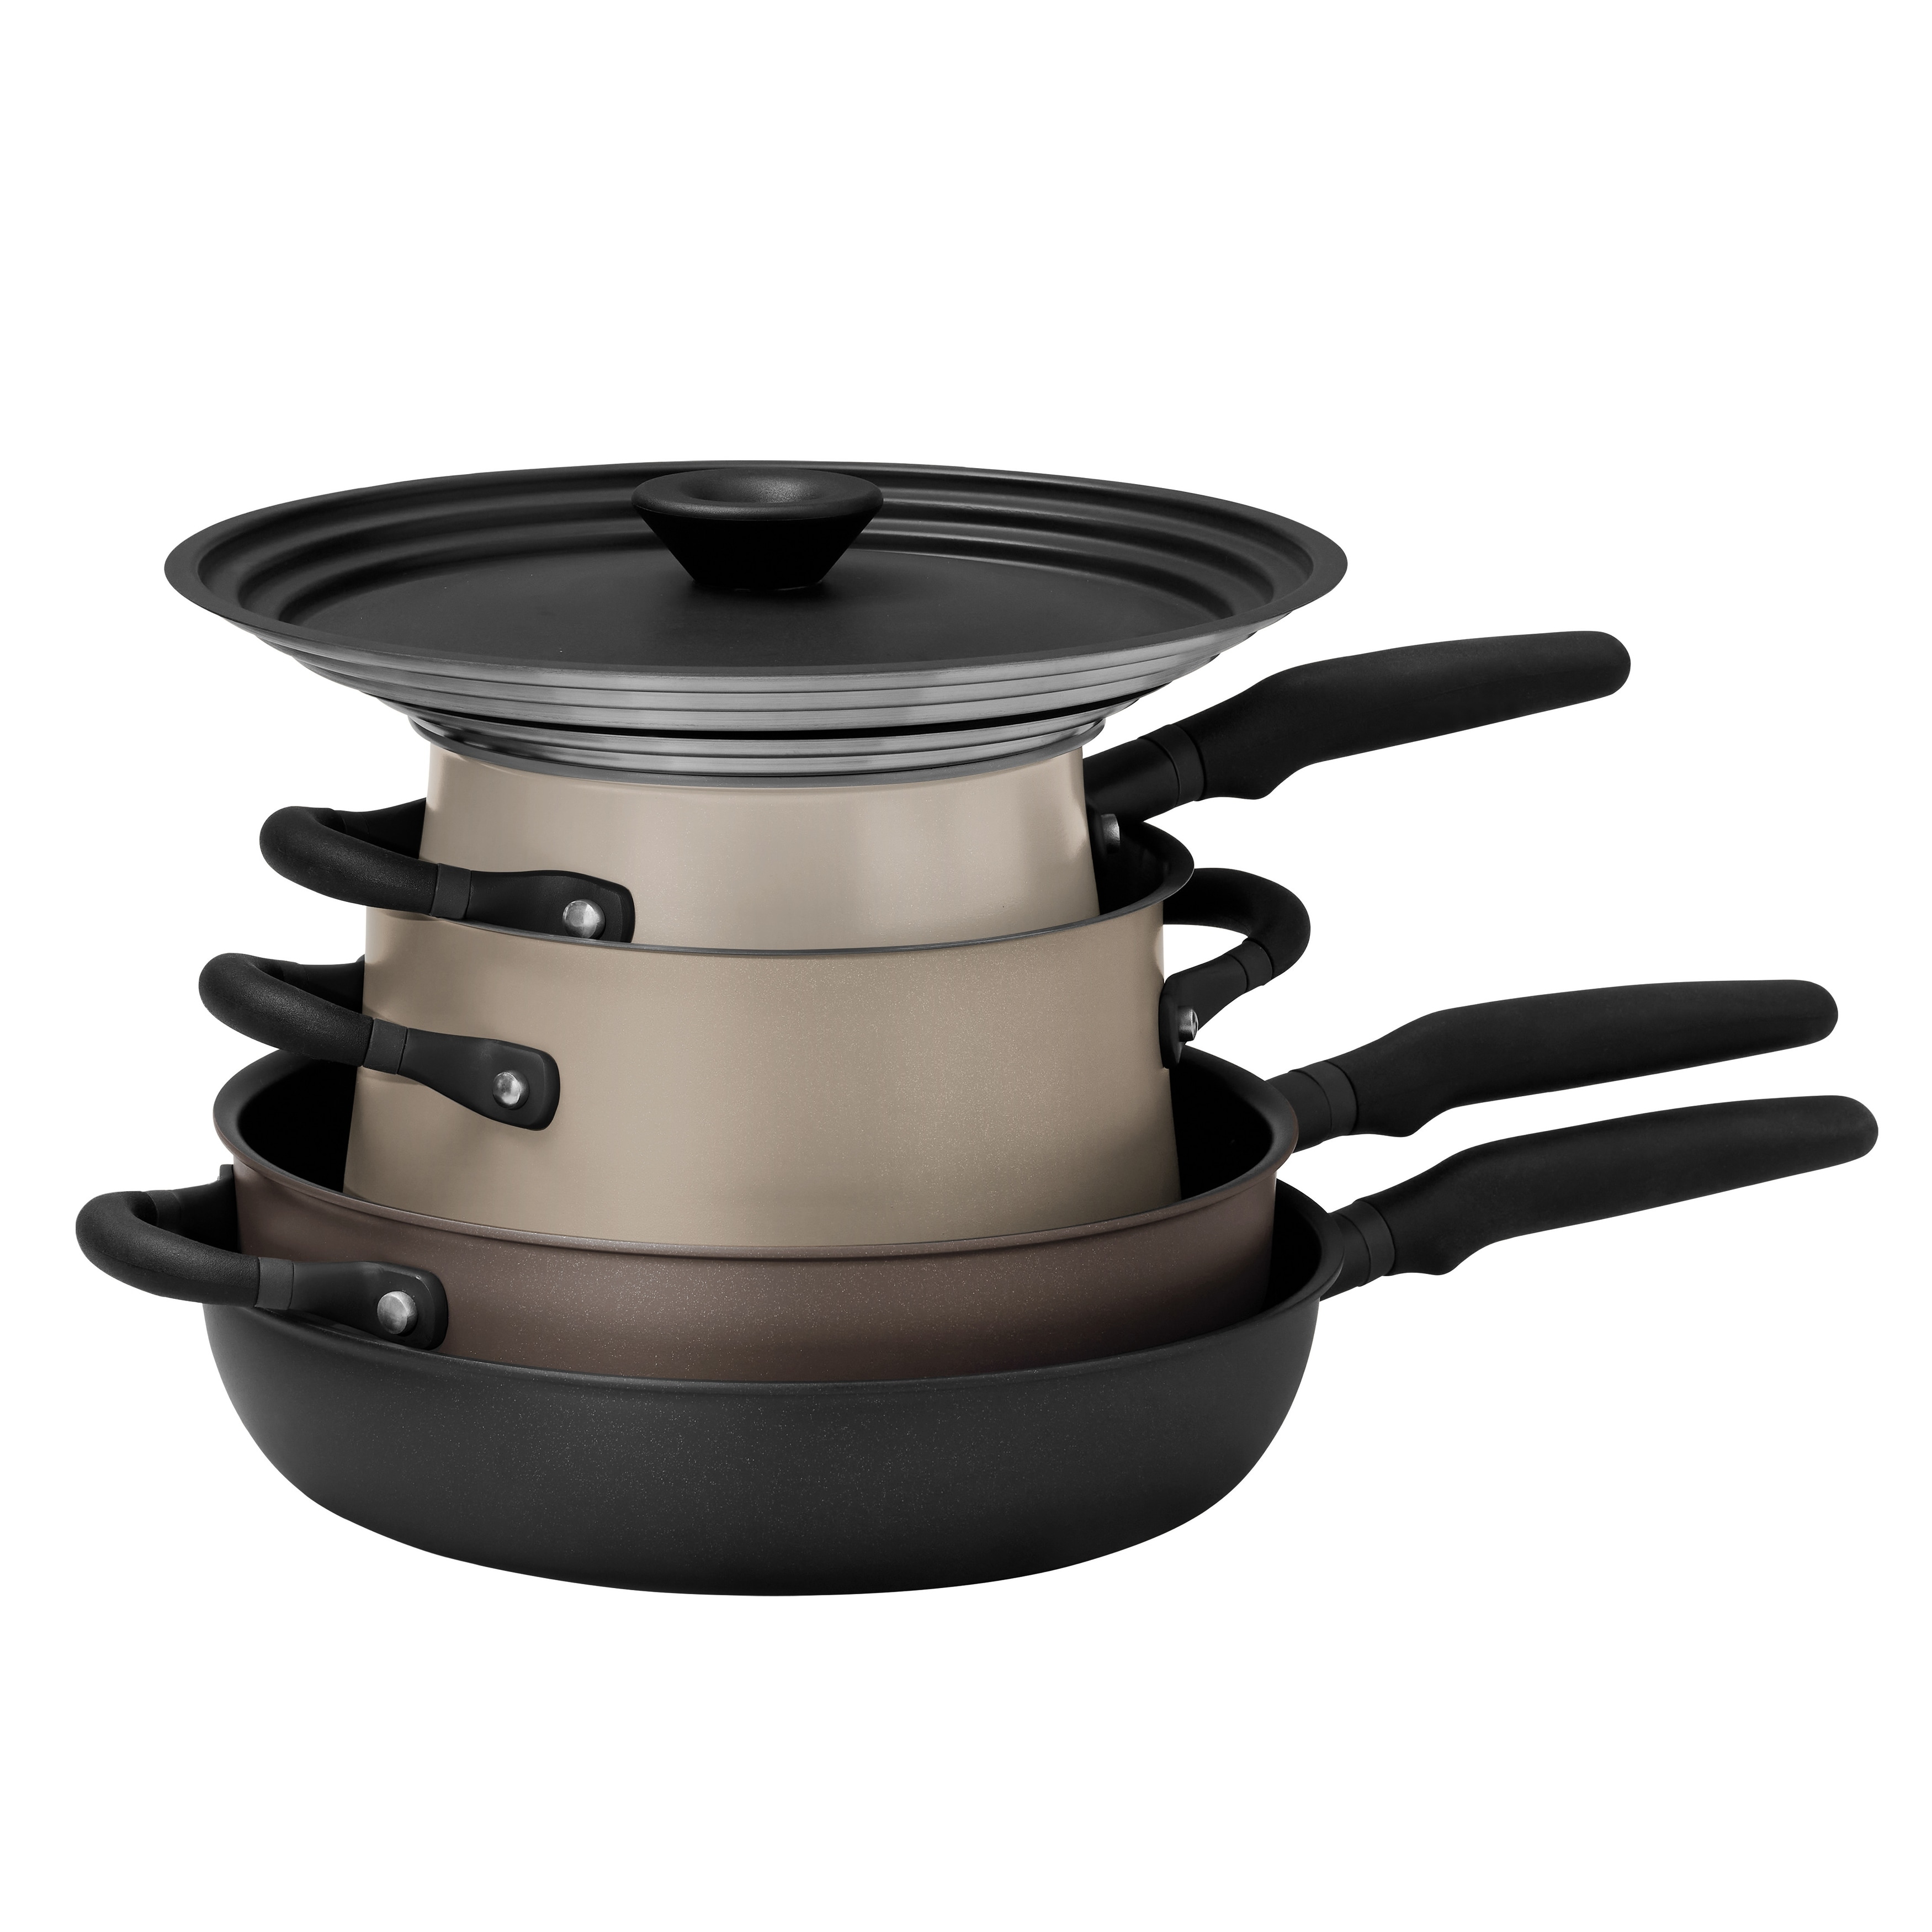 https://ak1.ostkcdn.com/images/products/is/images/direct/9b09743888799d48975b90cbbe8b8066ca2e3117/Meyer-Accent-Series-Nonstick-and-Stainless-Steel-Induction-Cookware-Essentials-Set%2C-6-Piece%2C-Cinder-and-Smoke-Edition.jpg